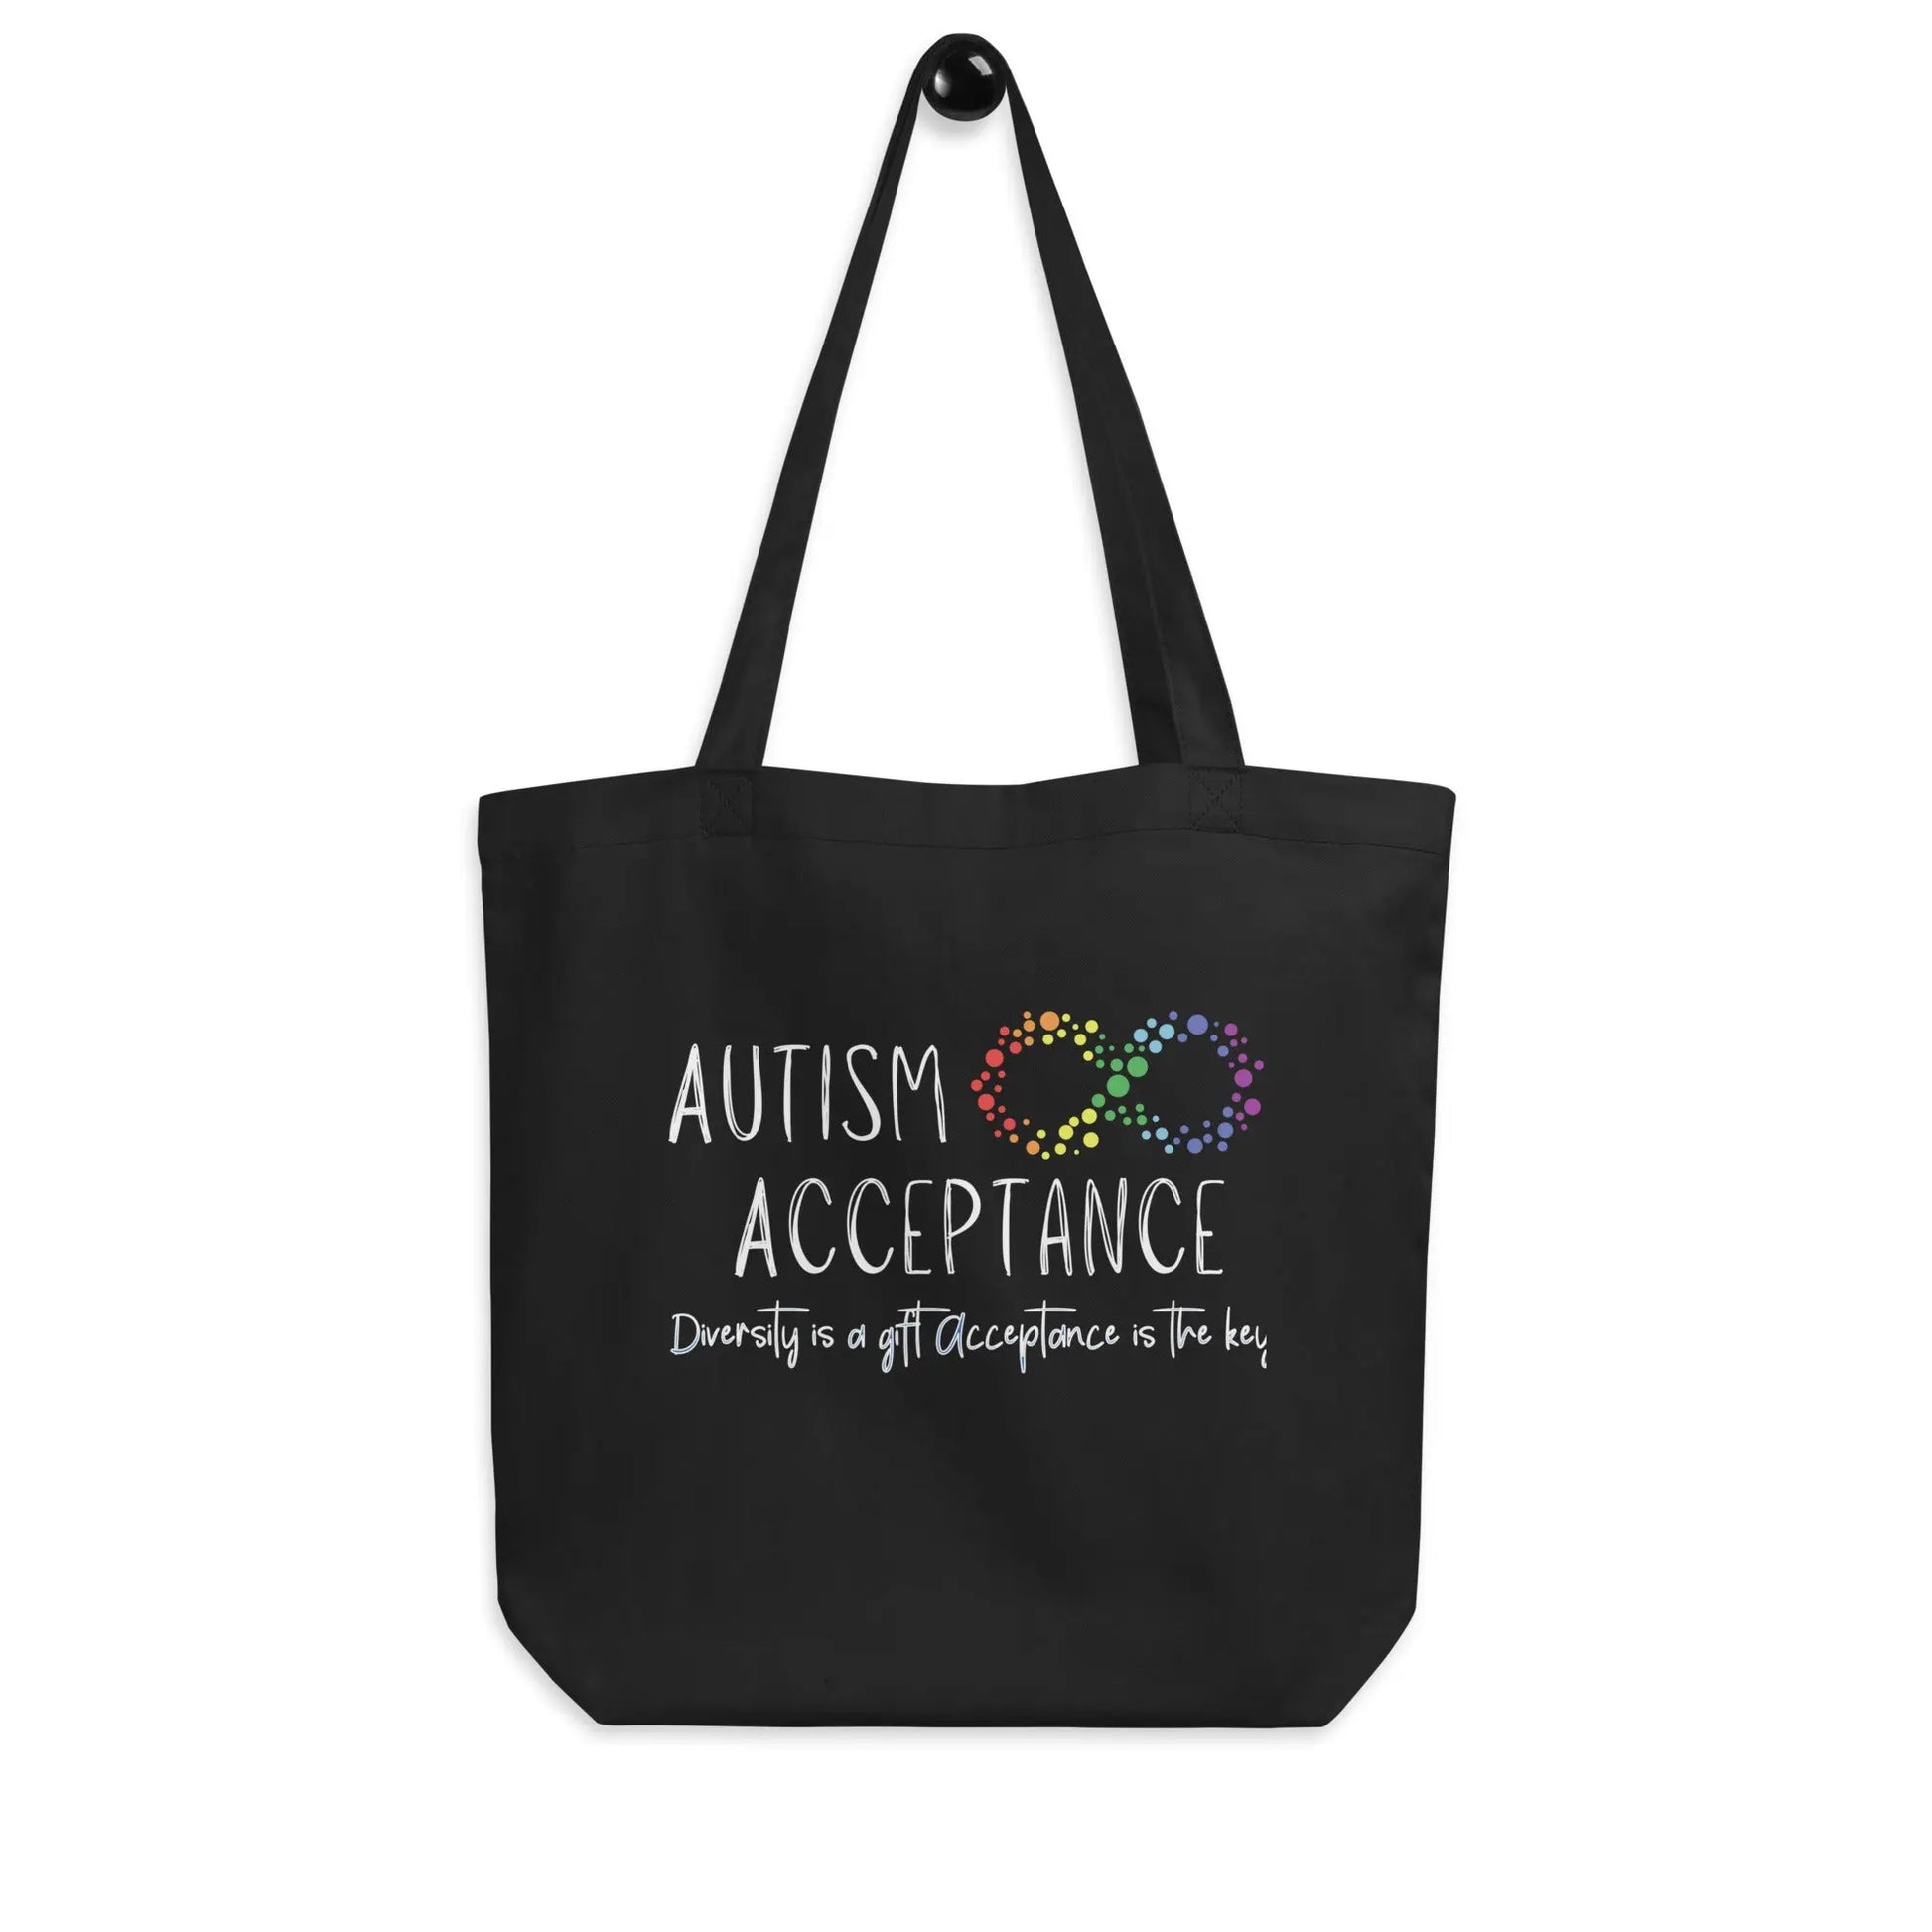 Cute Tote Bag for Autism Advocates - Spread the Message of Acceptance and Diversity Personalized Option Great Gift for Supporters of Autism Affordable ABA Materials